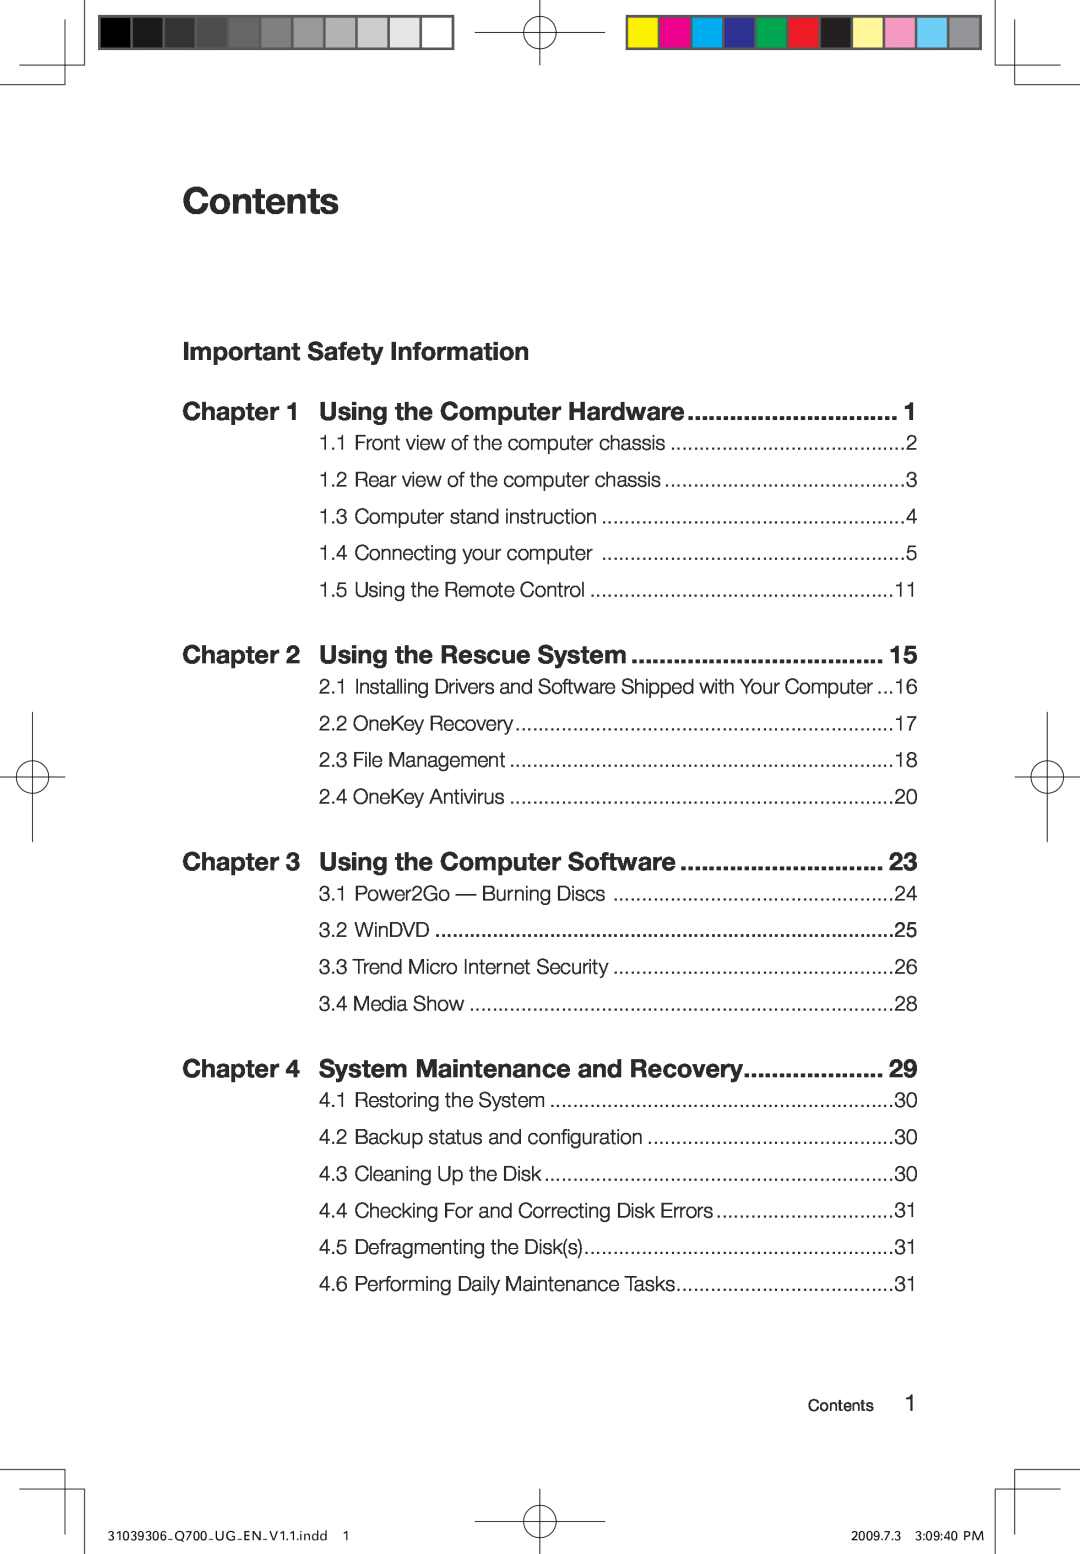 Lenovo Q700 manual Contents, Important Safety Information, Using the Computer Hardware, Using the Rescue System 